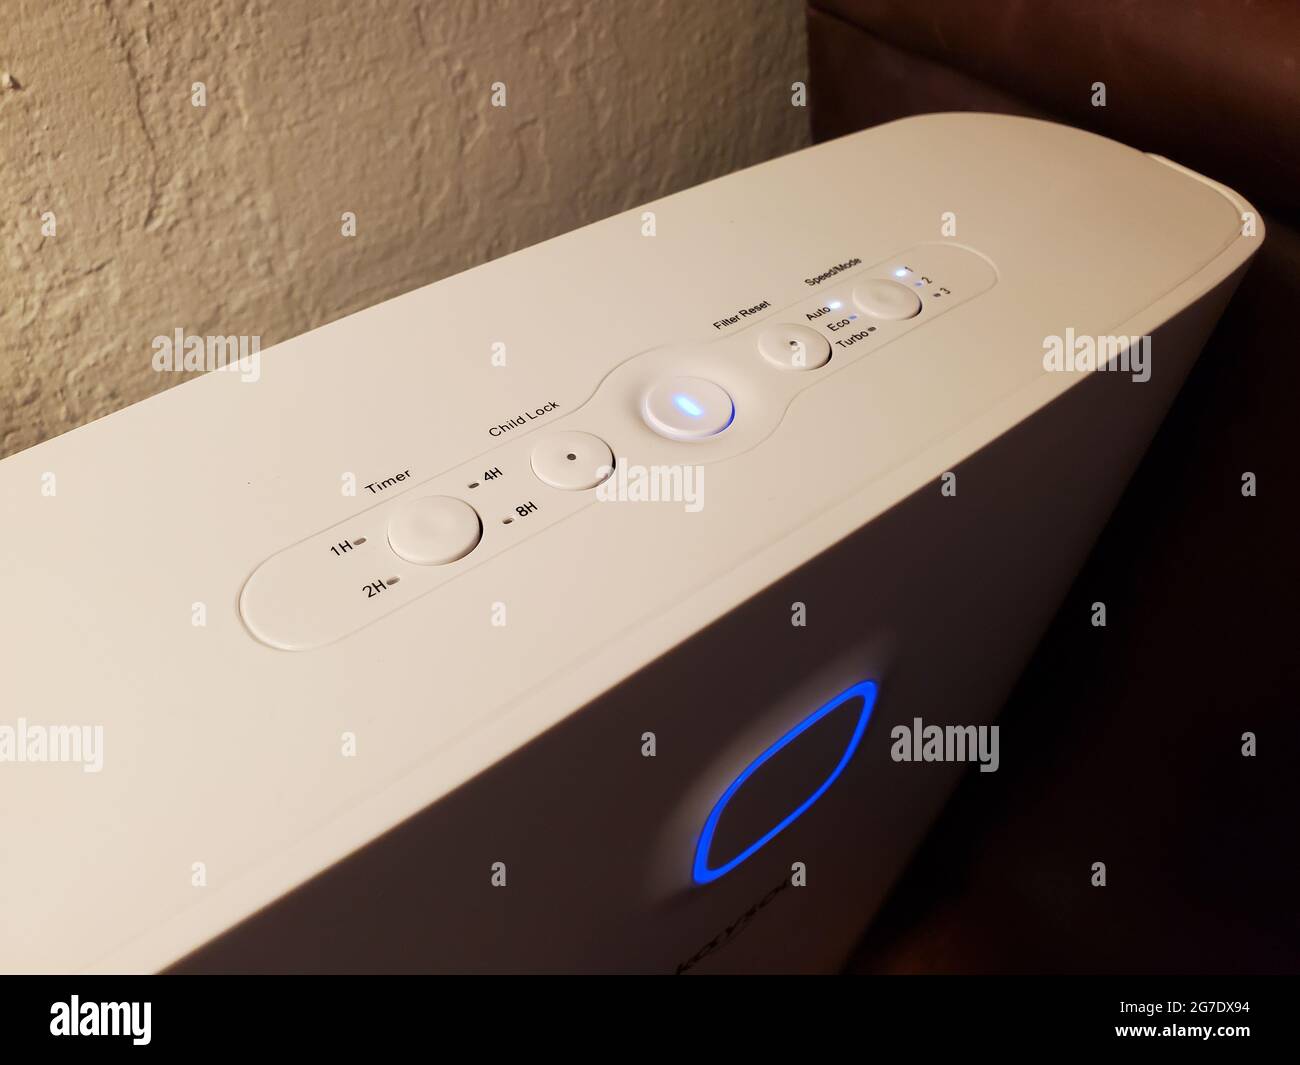 Okaysou Airmax 10L pro smart HEPA 13 air purifier in a smart home in Lafayette, California, May 19, 2021. () Stock Photo